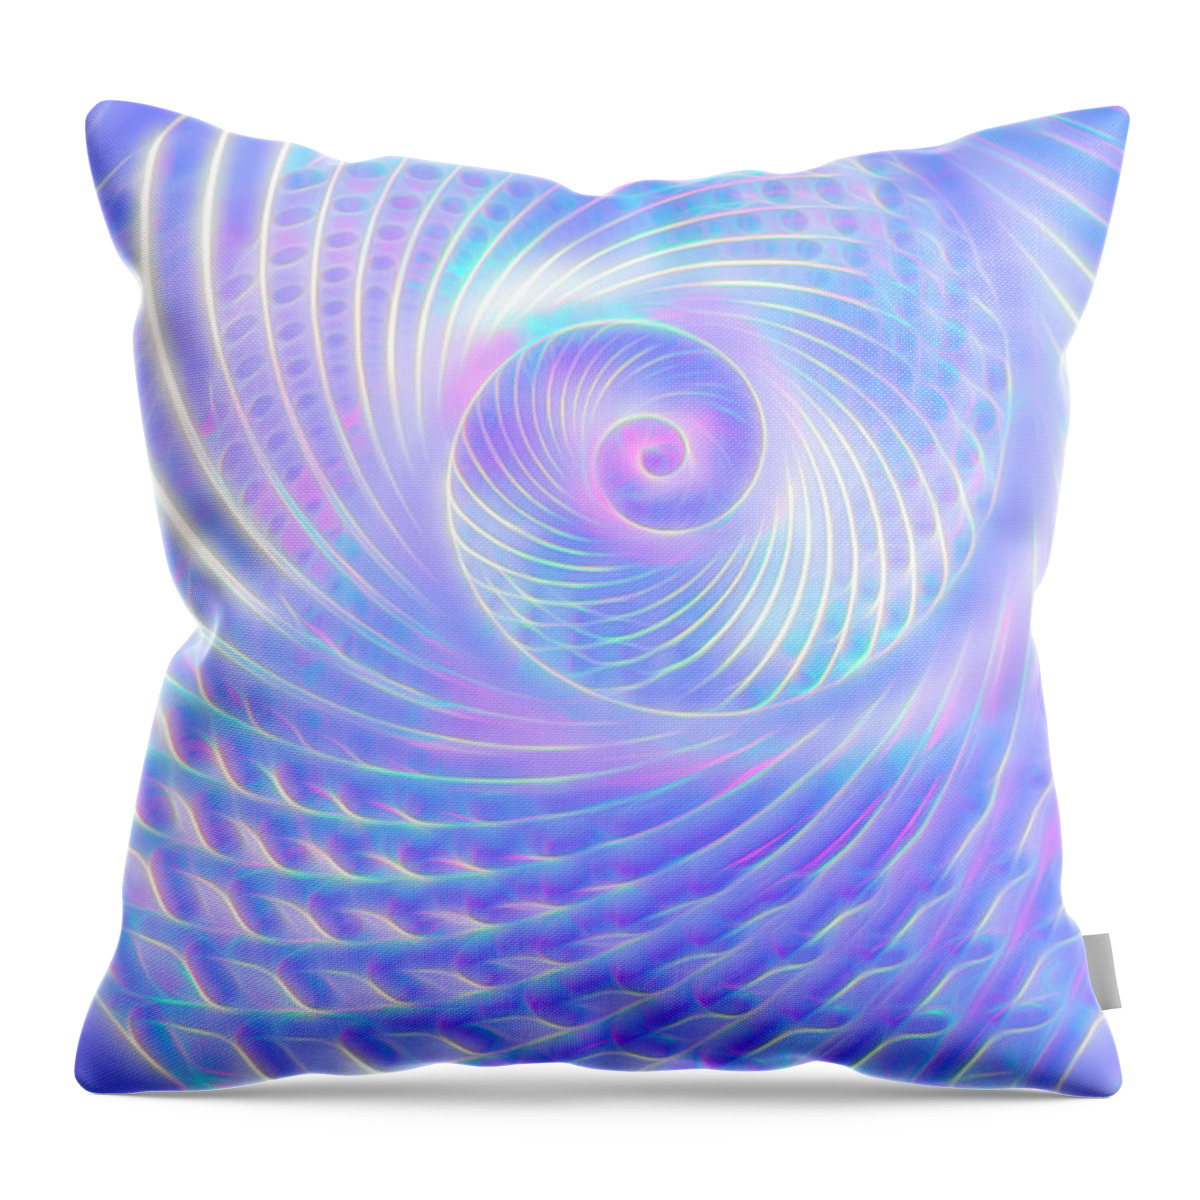 Nautilus Throw Pillow featuring the digital art In A Beginning by Carmen Hathaway